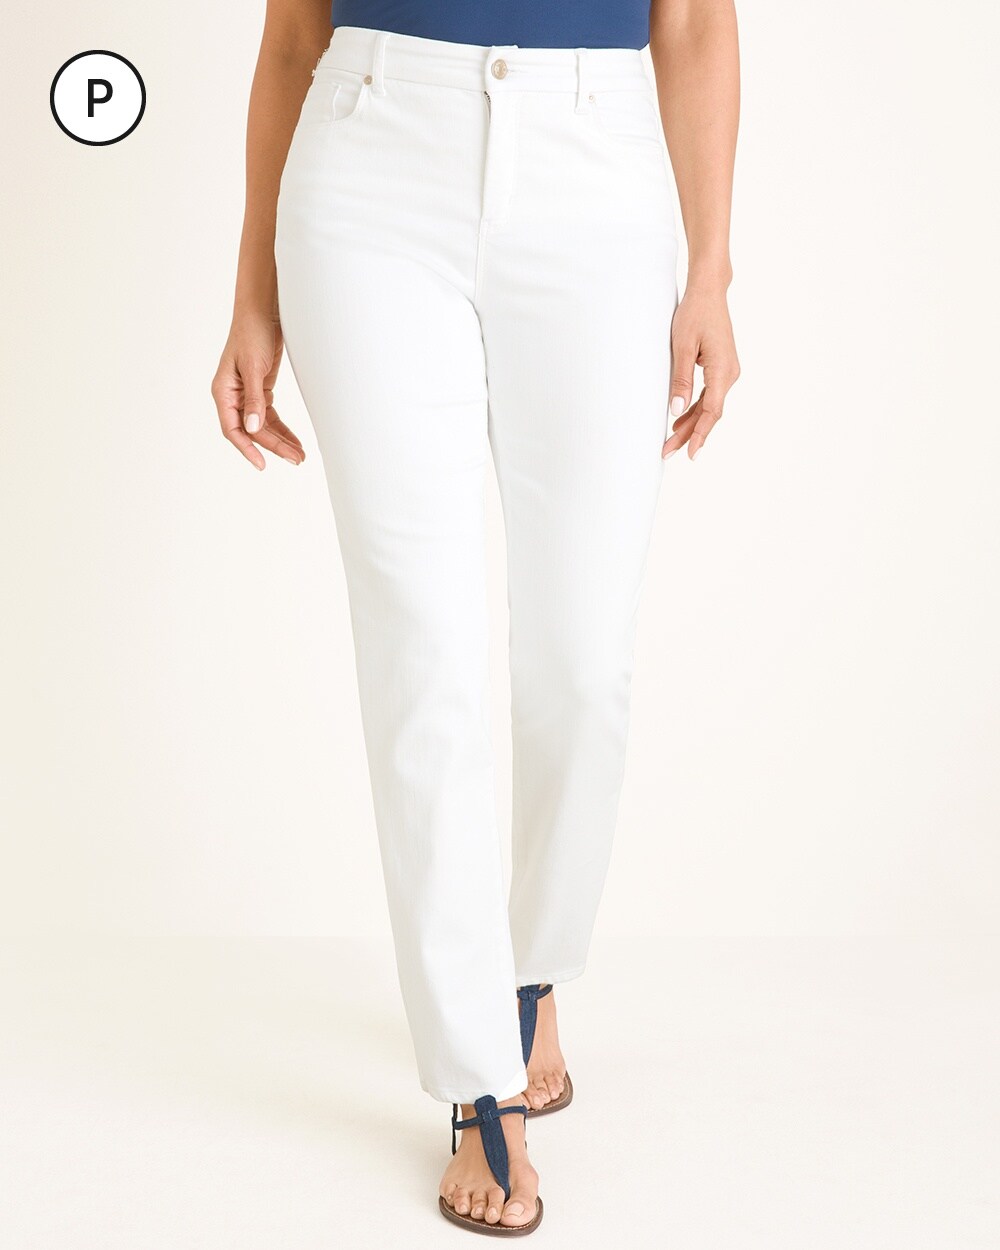 So Slimming Petite No-Stain White Girlfriend Jeans